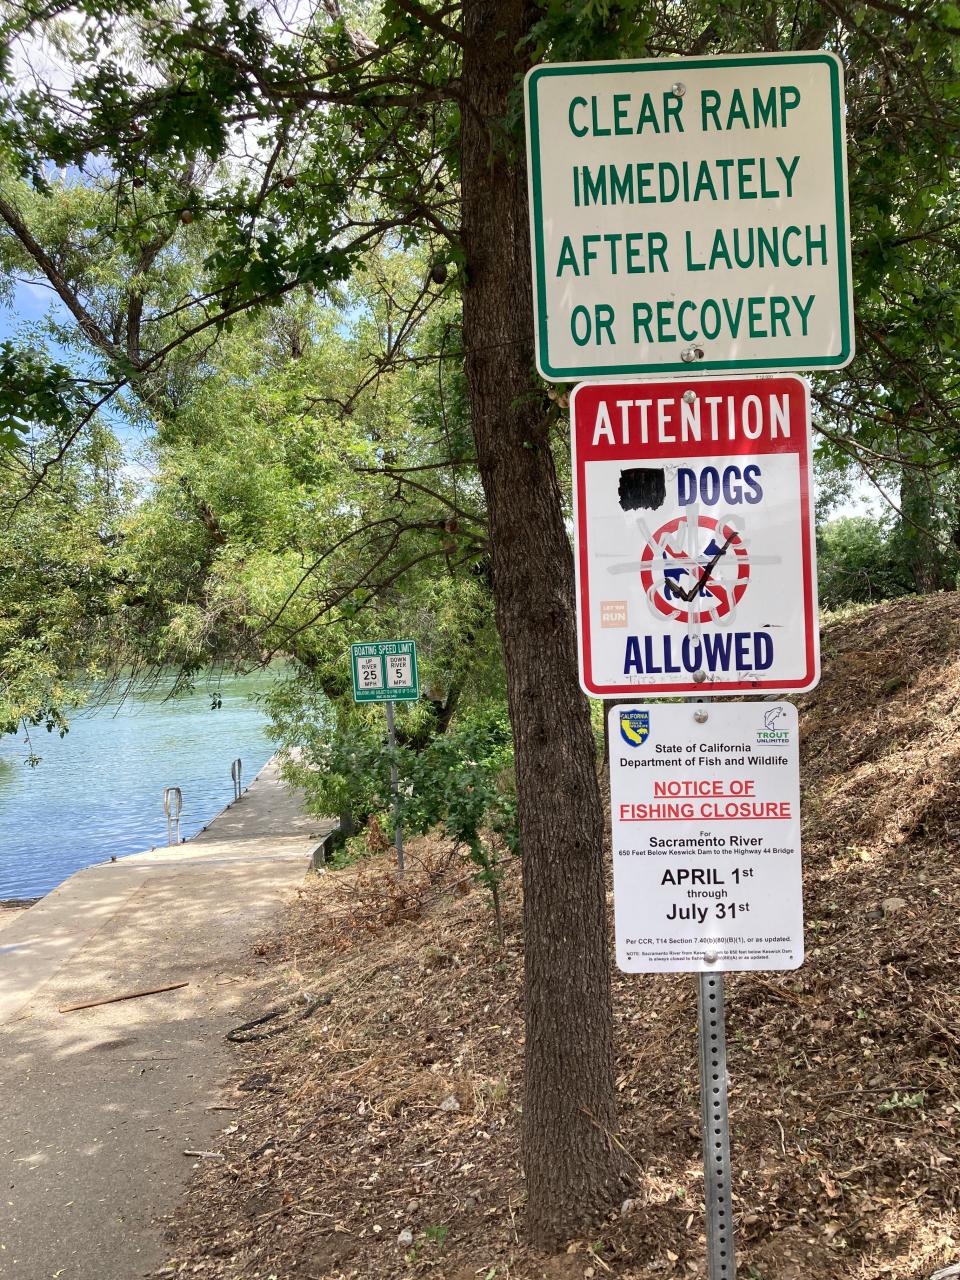 Design work to upgrade the boat ramp along the Sacramento River east of Riverfront Park in Redding has started.